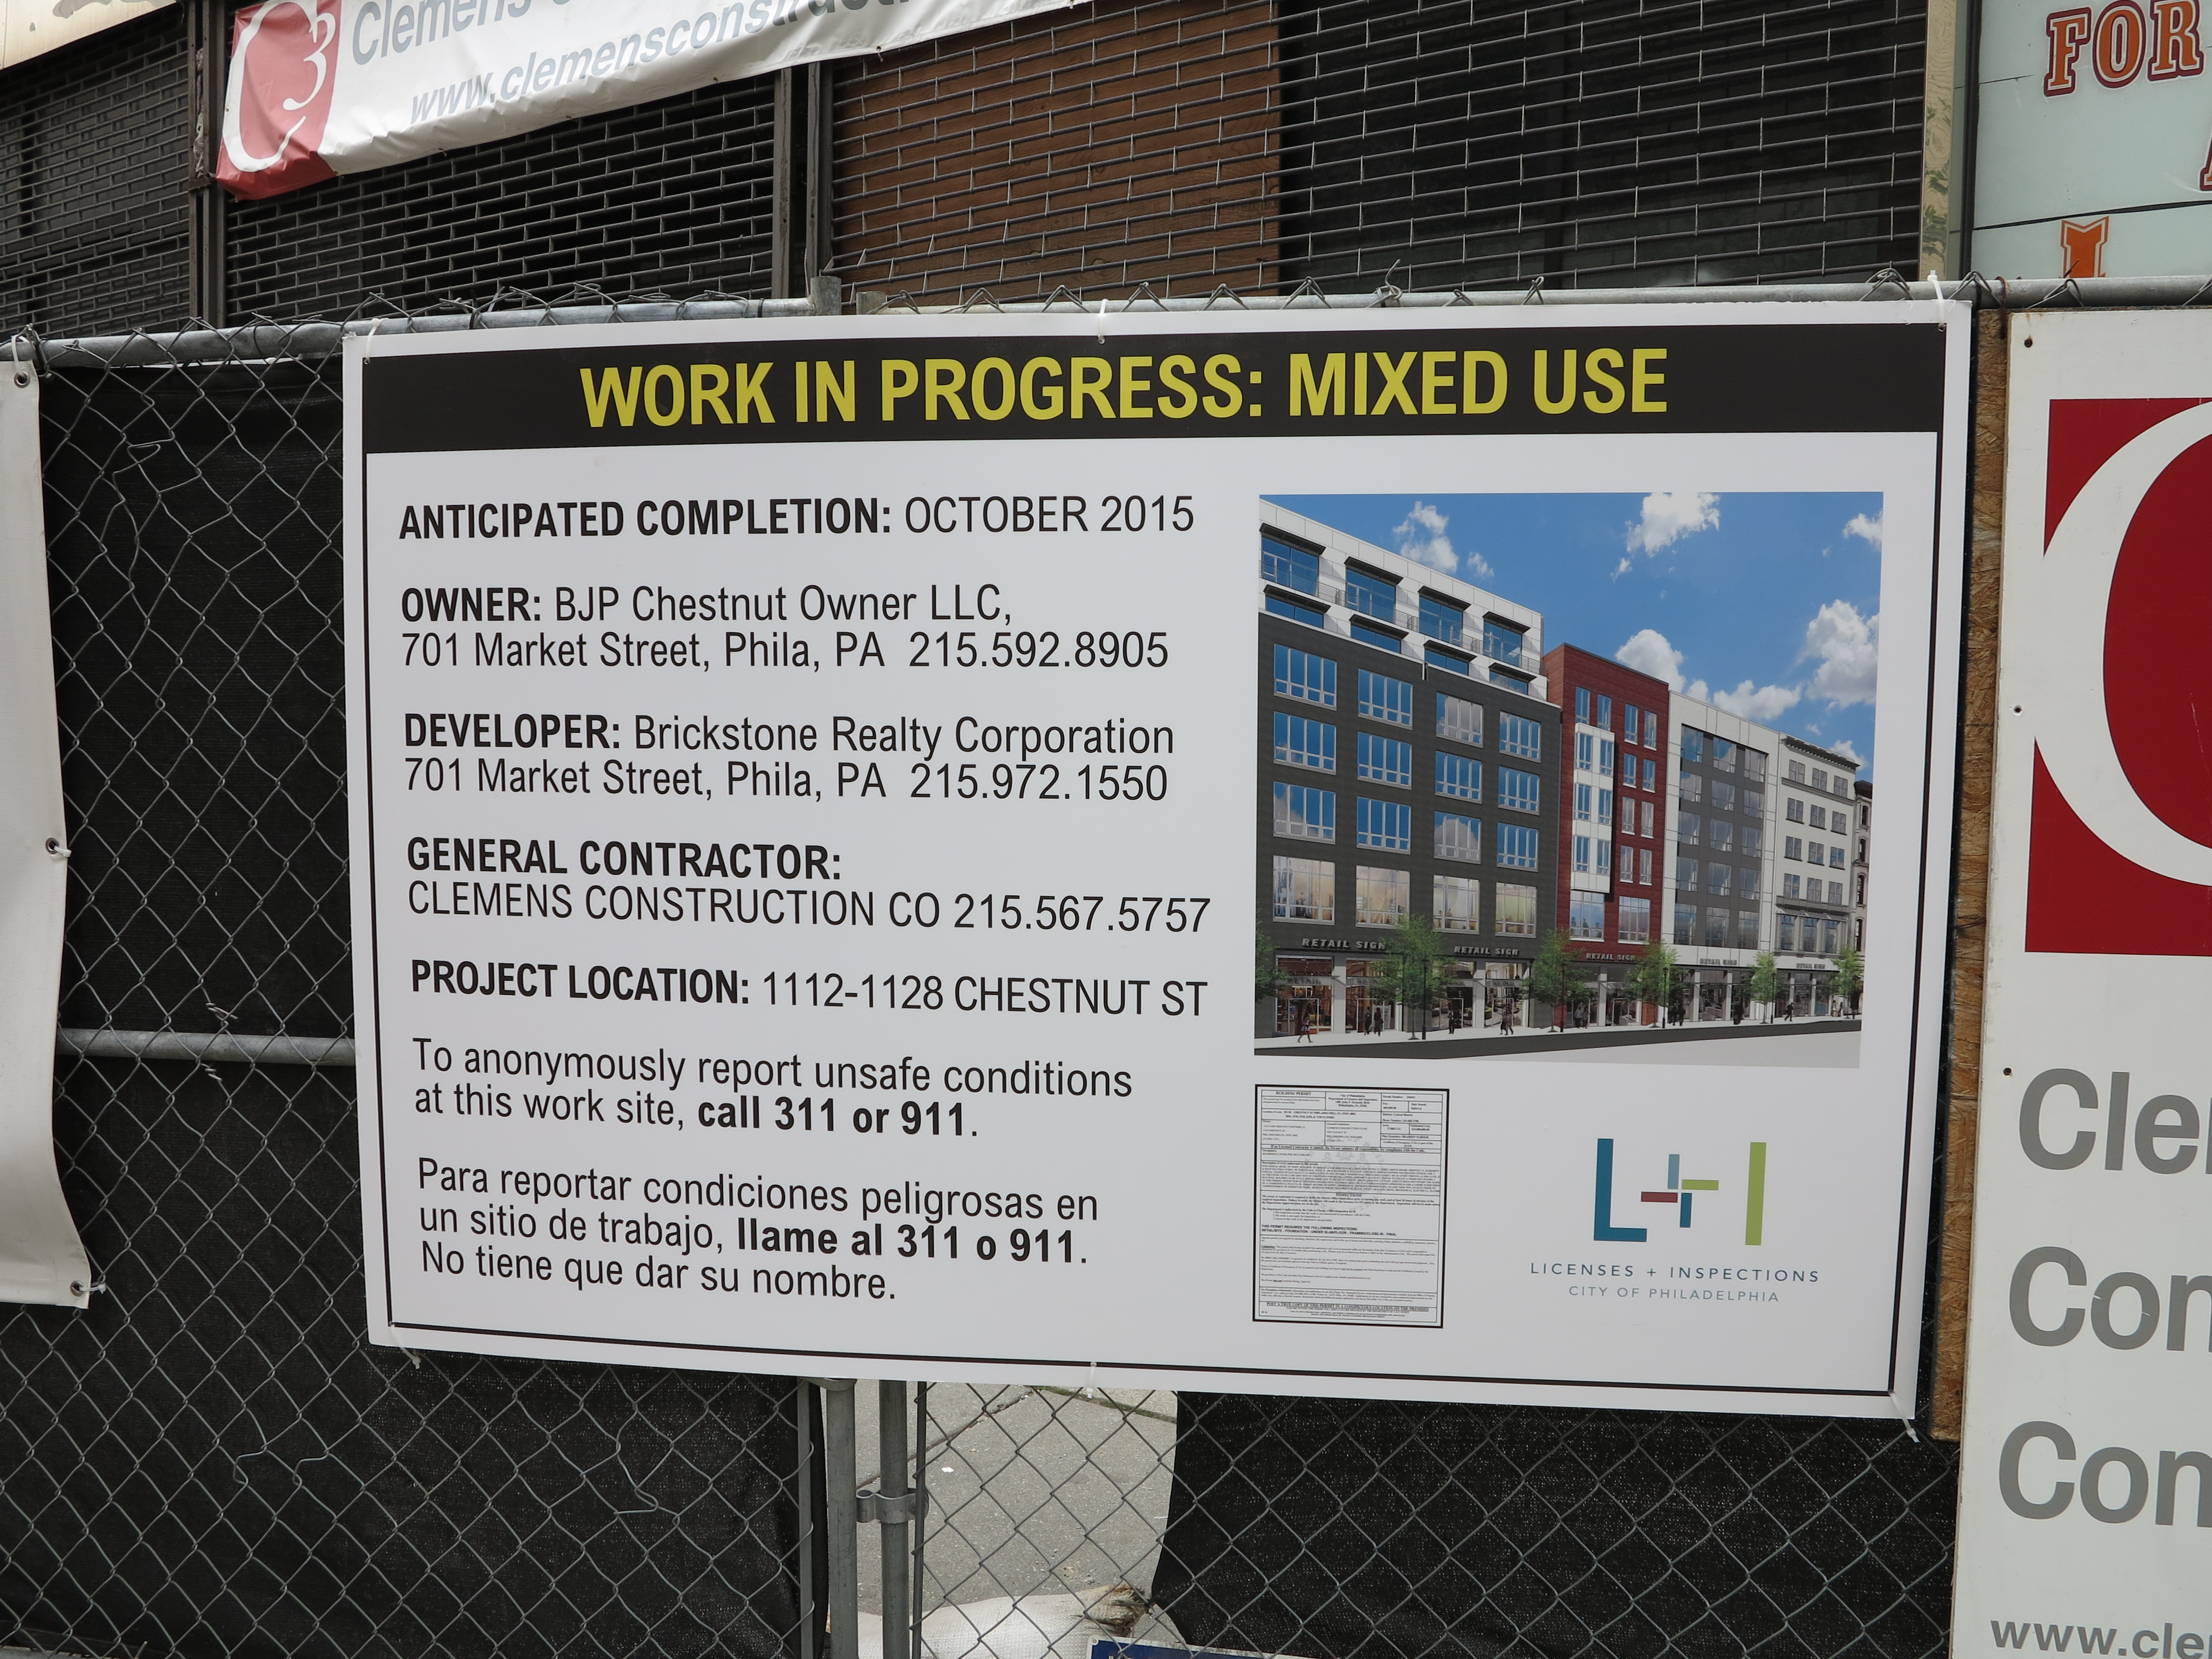 WORK IN PROGRESS: new project information sign at 1112-1128 Chestnut Street